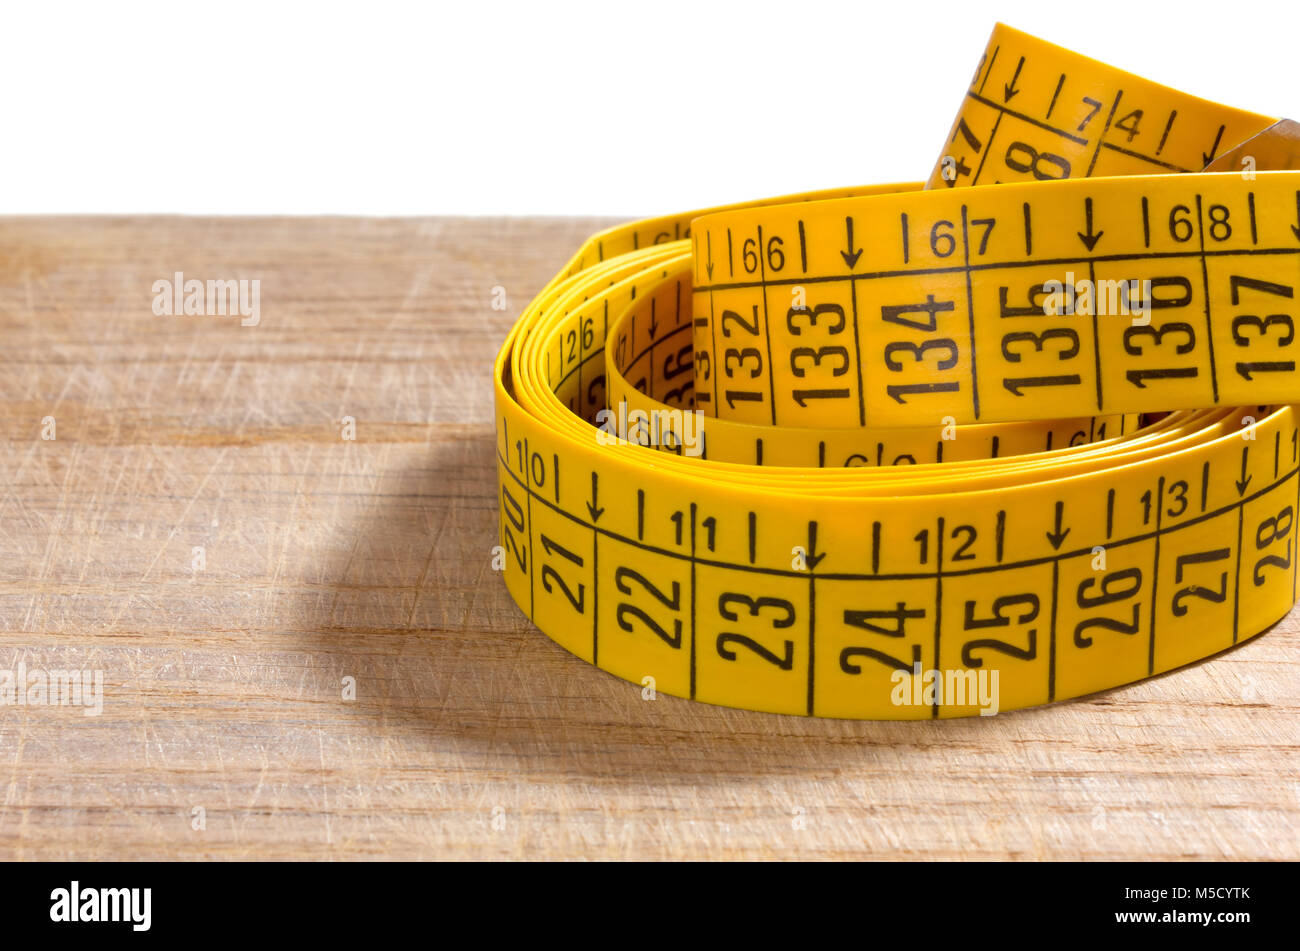 https://c8.alamy.com/comp/M5CYTK/rolled-up-yellow-tailor-measuring-tape-on-an-old-wooden-surface-M5CYTK.jpg